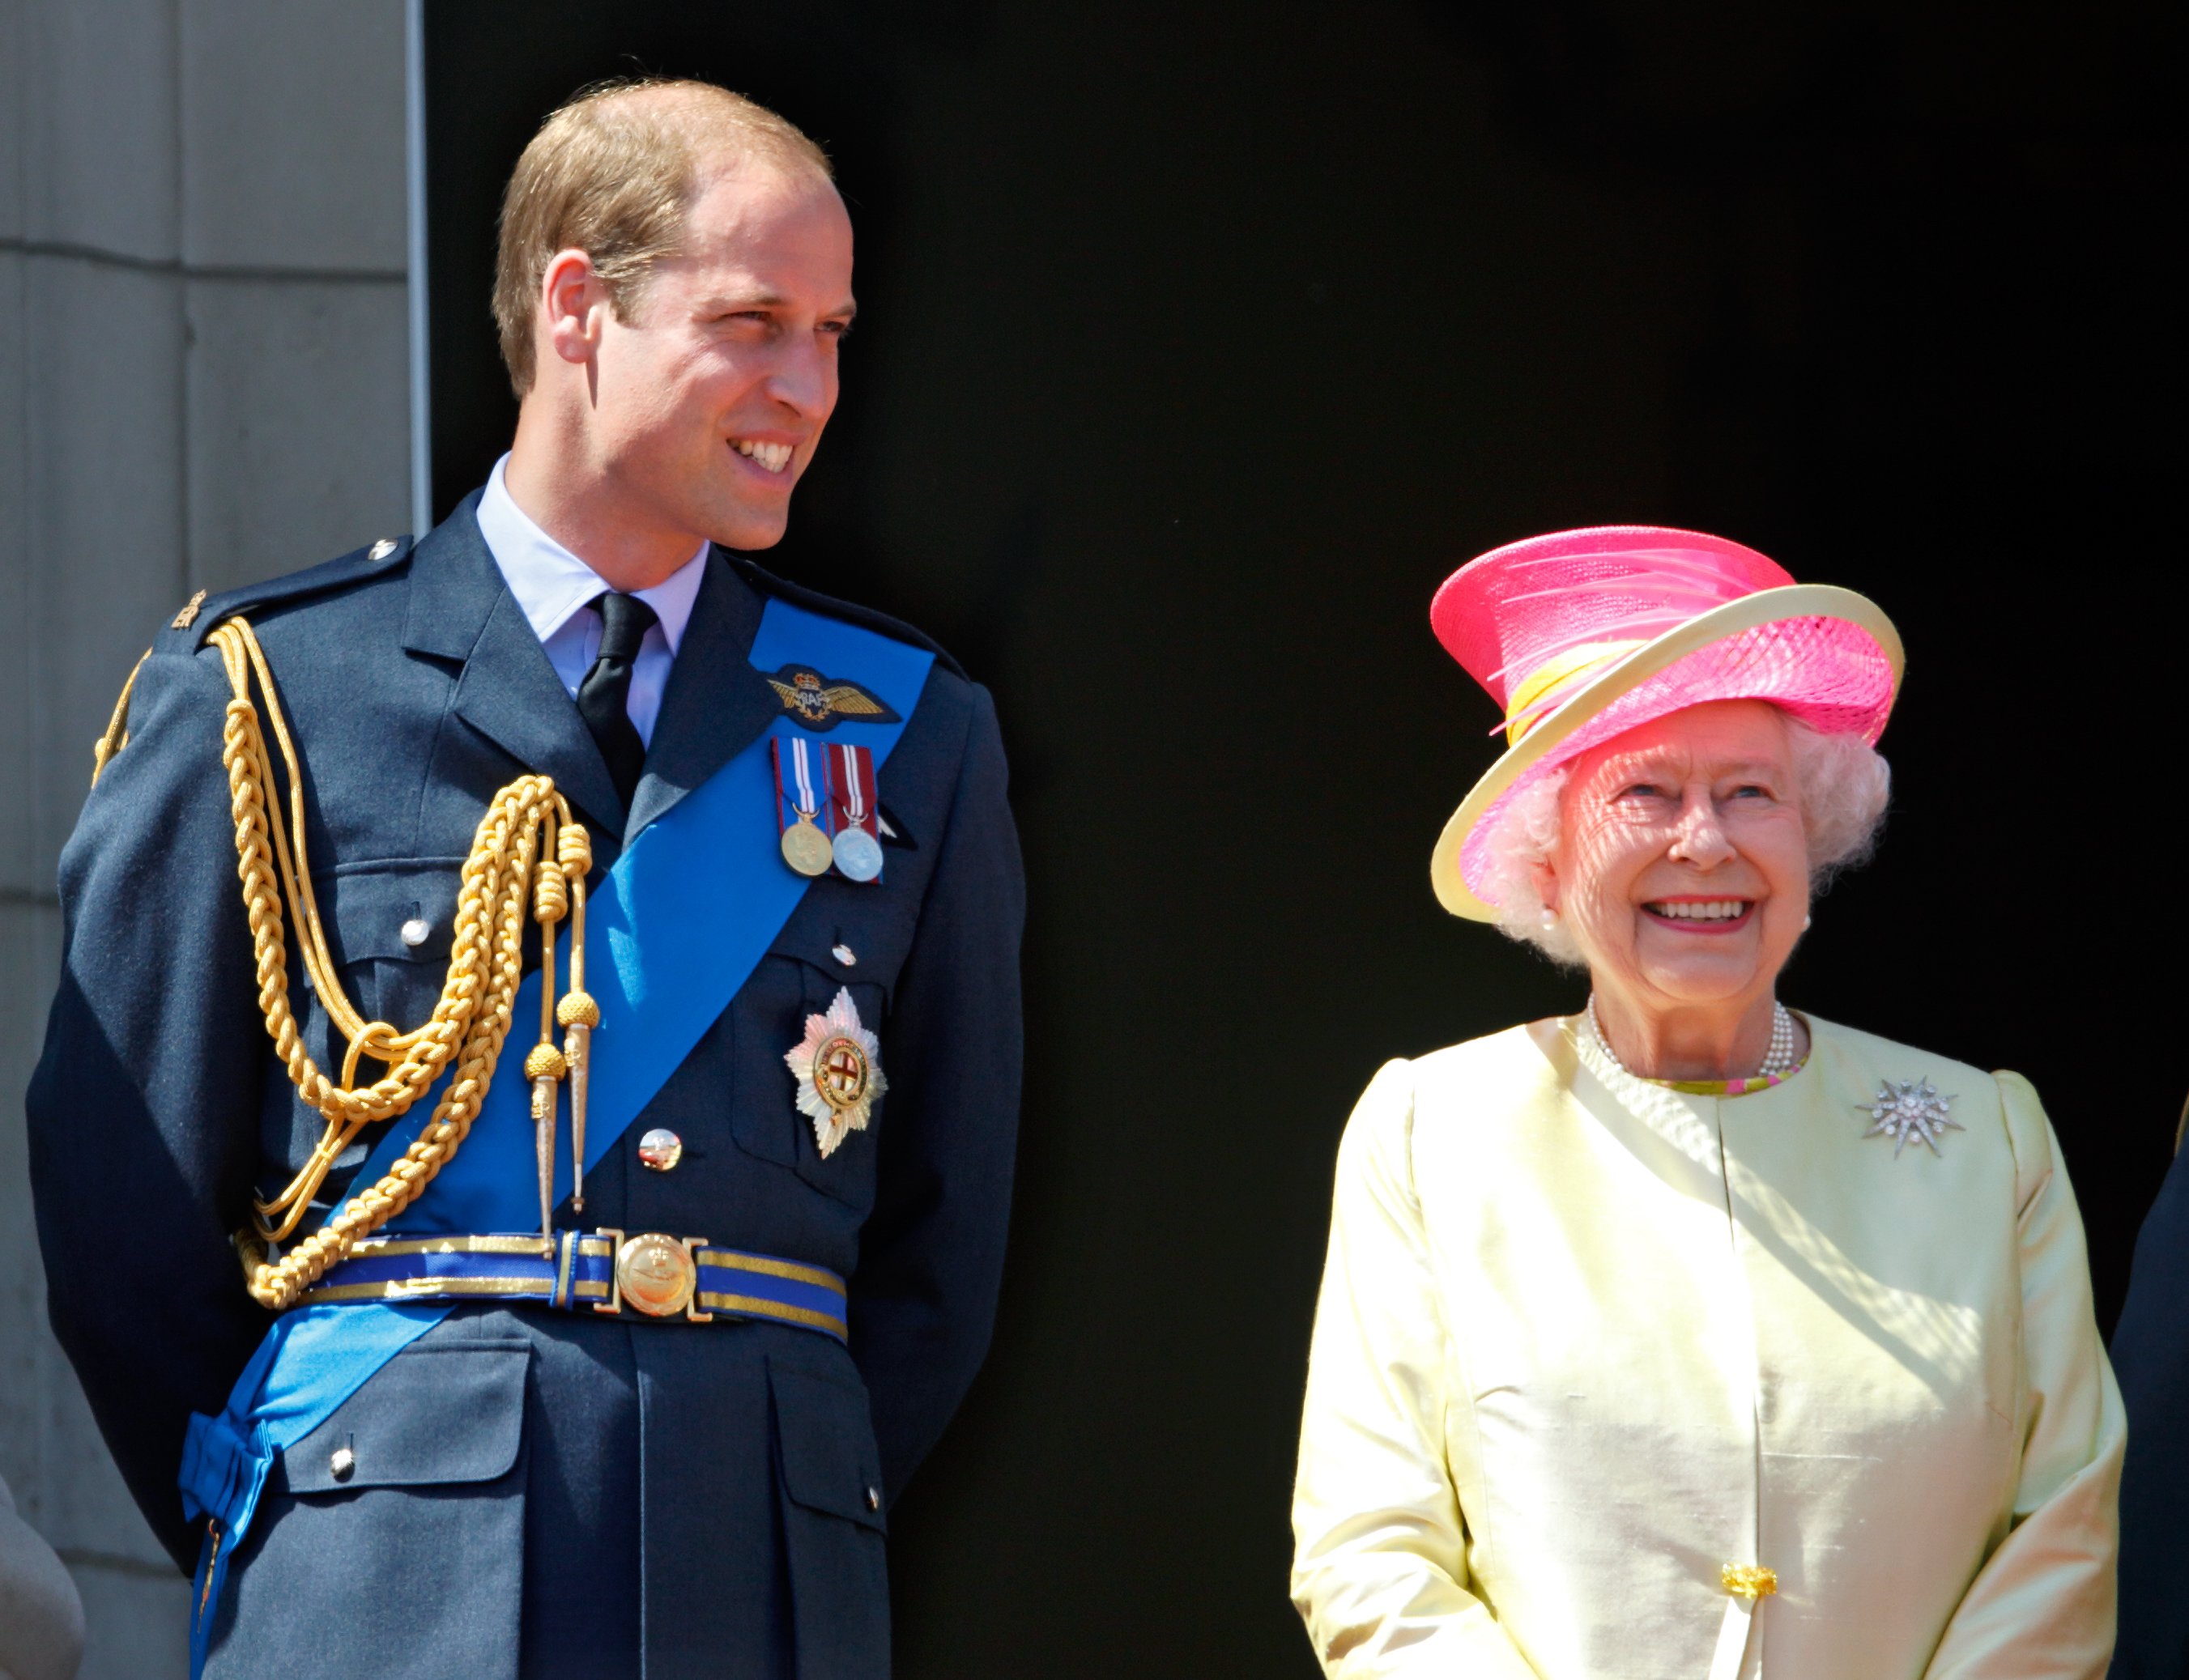 Prince William and his grandmother Queen Elizabeth II watching a flypast of Spitfire & Hurricane aircraft from the balcony of Buckingham Palace on July 10, 2015 in London, England ┃Source: Getty Images